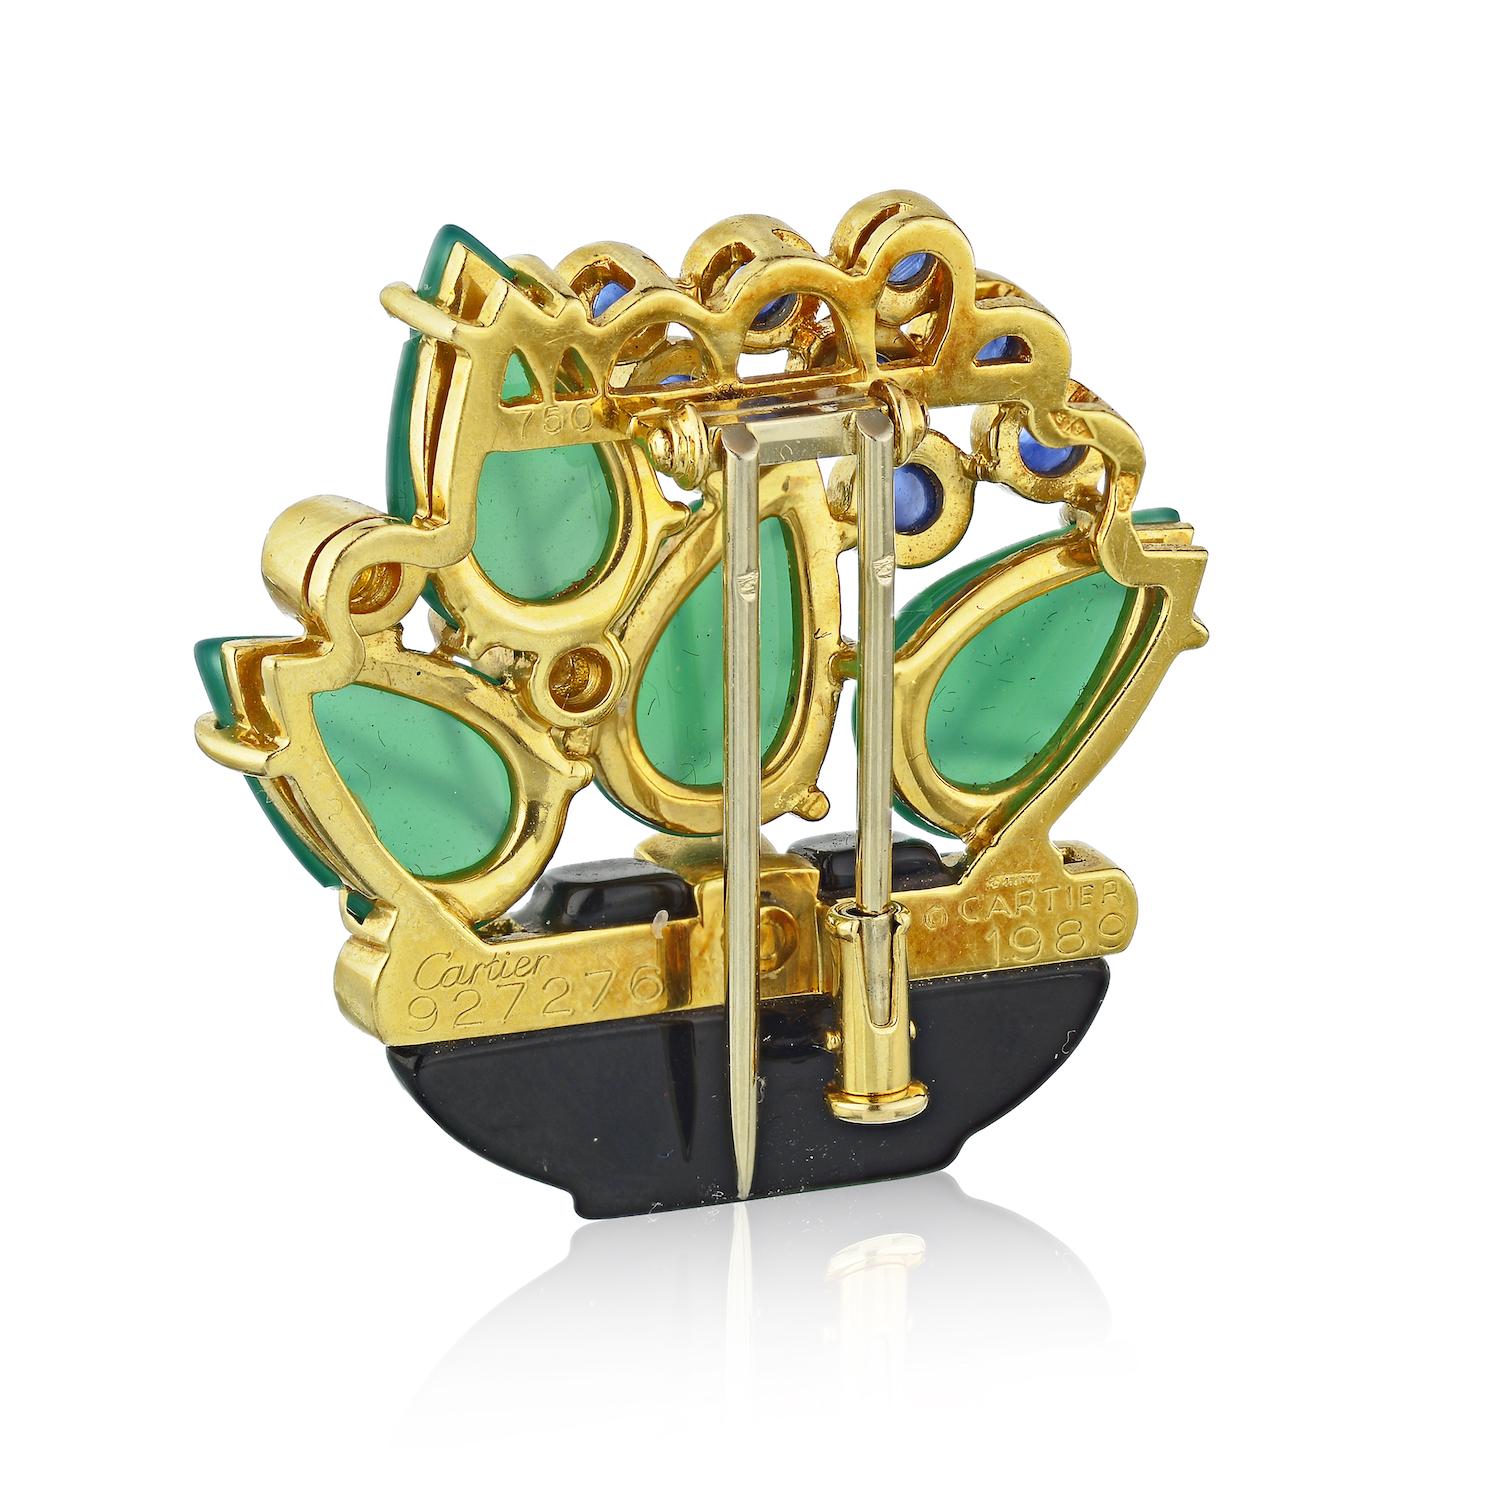 This is a listing for 2 exquisite brooches from Cartier's celebrated Les Indes Galantes collection features a floral design composed of a black onyx bowl accented with full-cut paved diamonds, green curved agate leaves, round cabochon blue sapphires